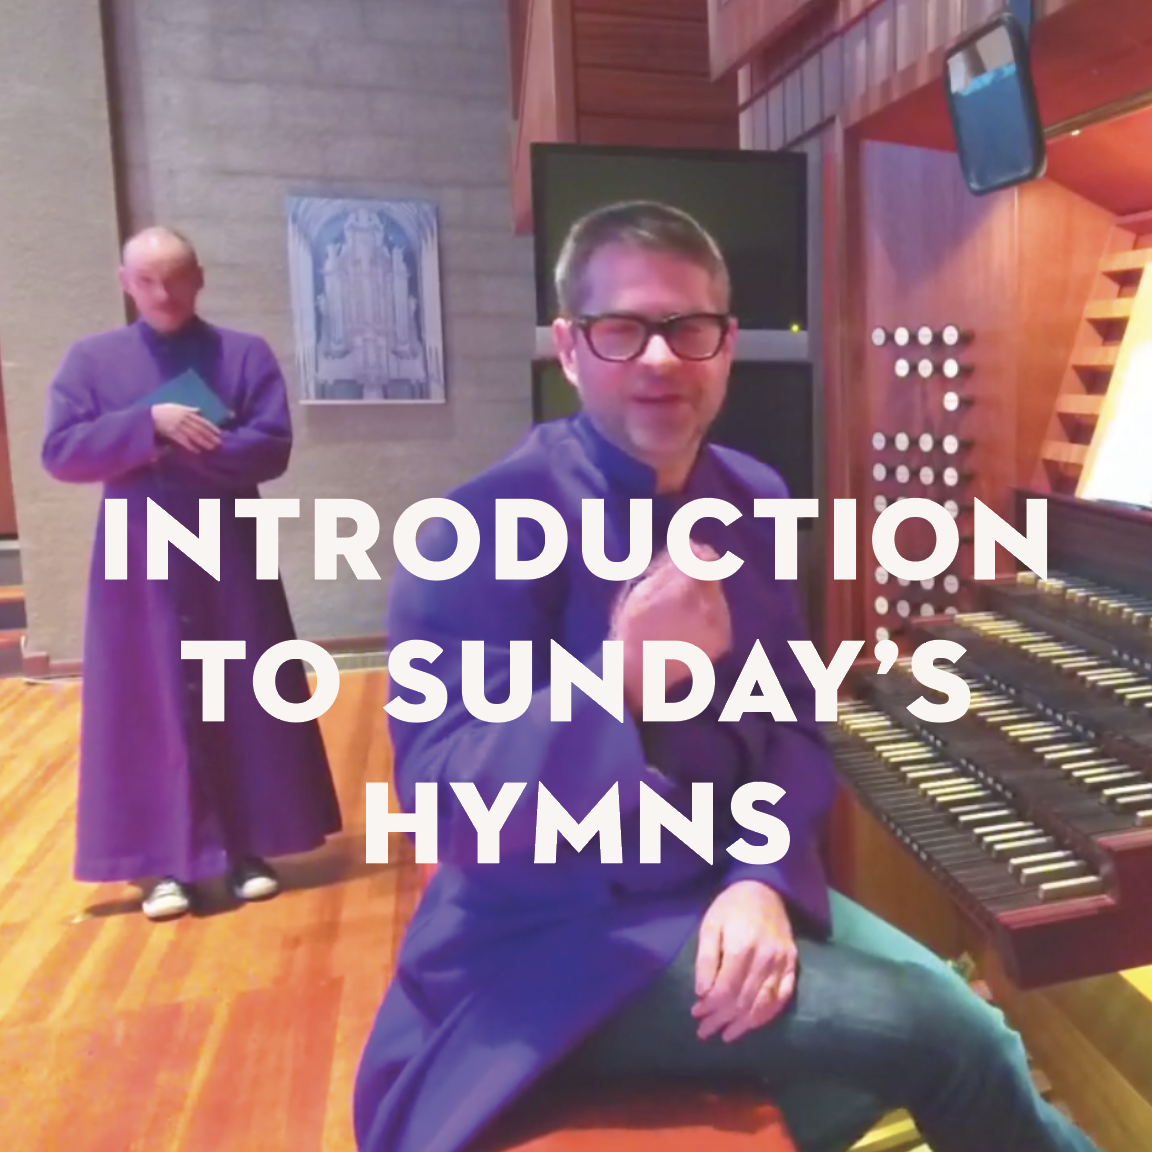 Introduction to Sunday’s Hymns: January 24, 2021